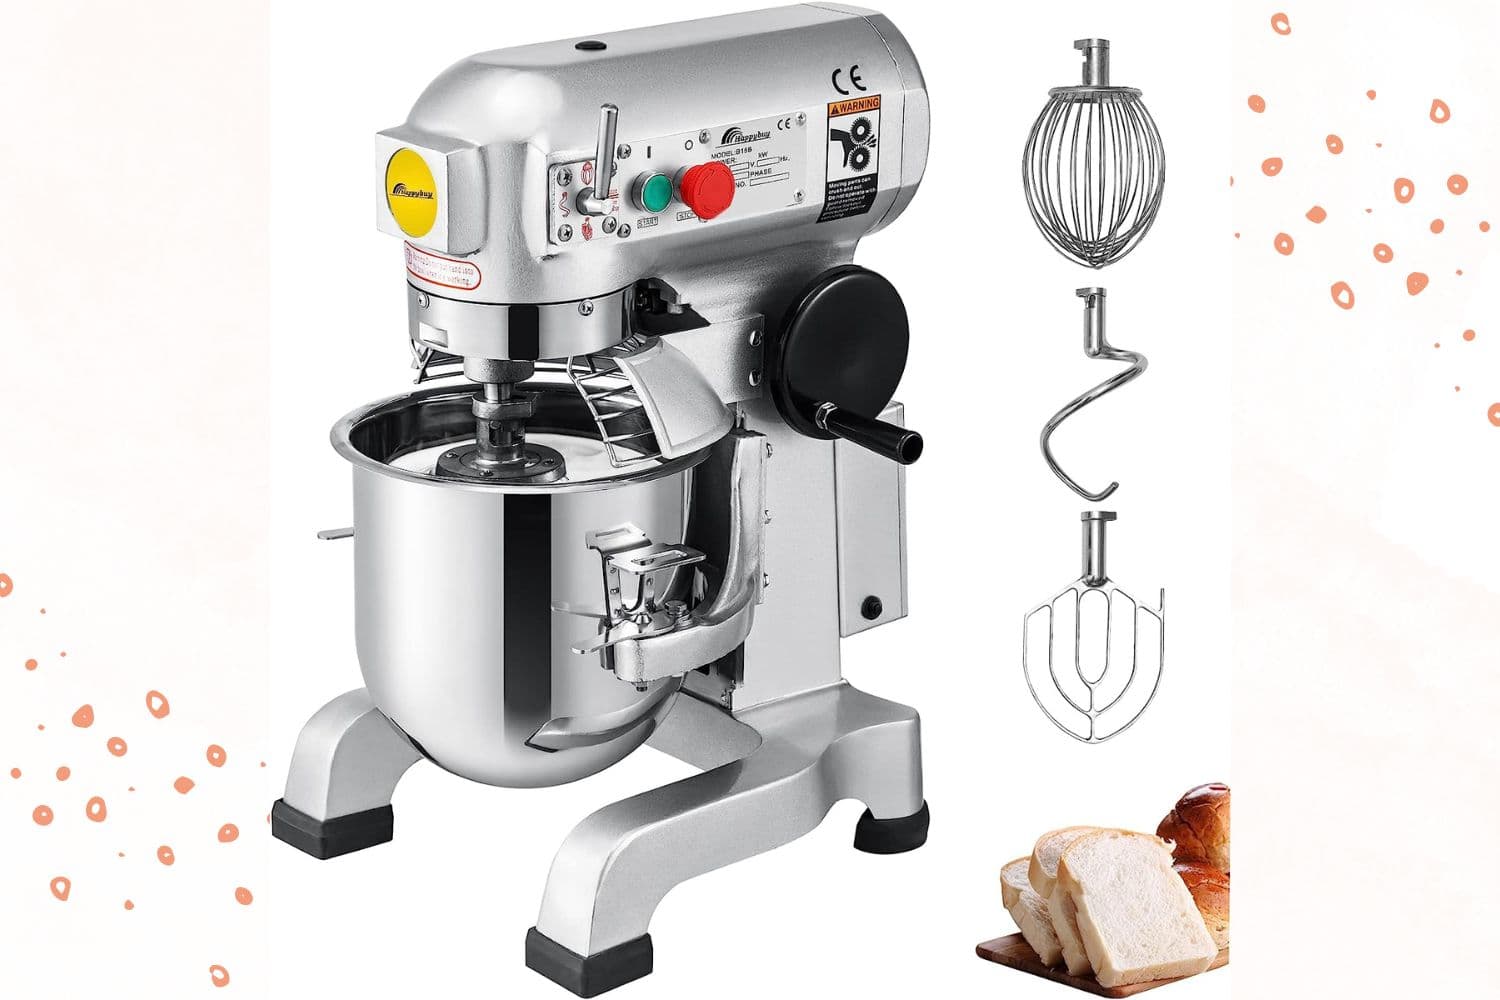 Happybuy Commercial Food Mixer: Best for Commercial